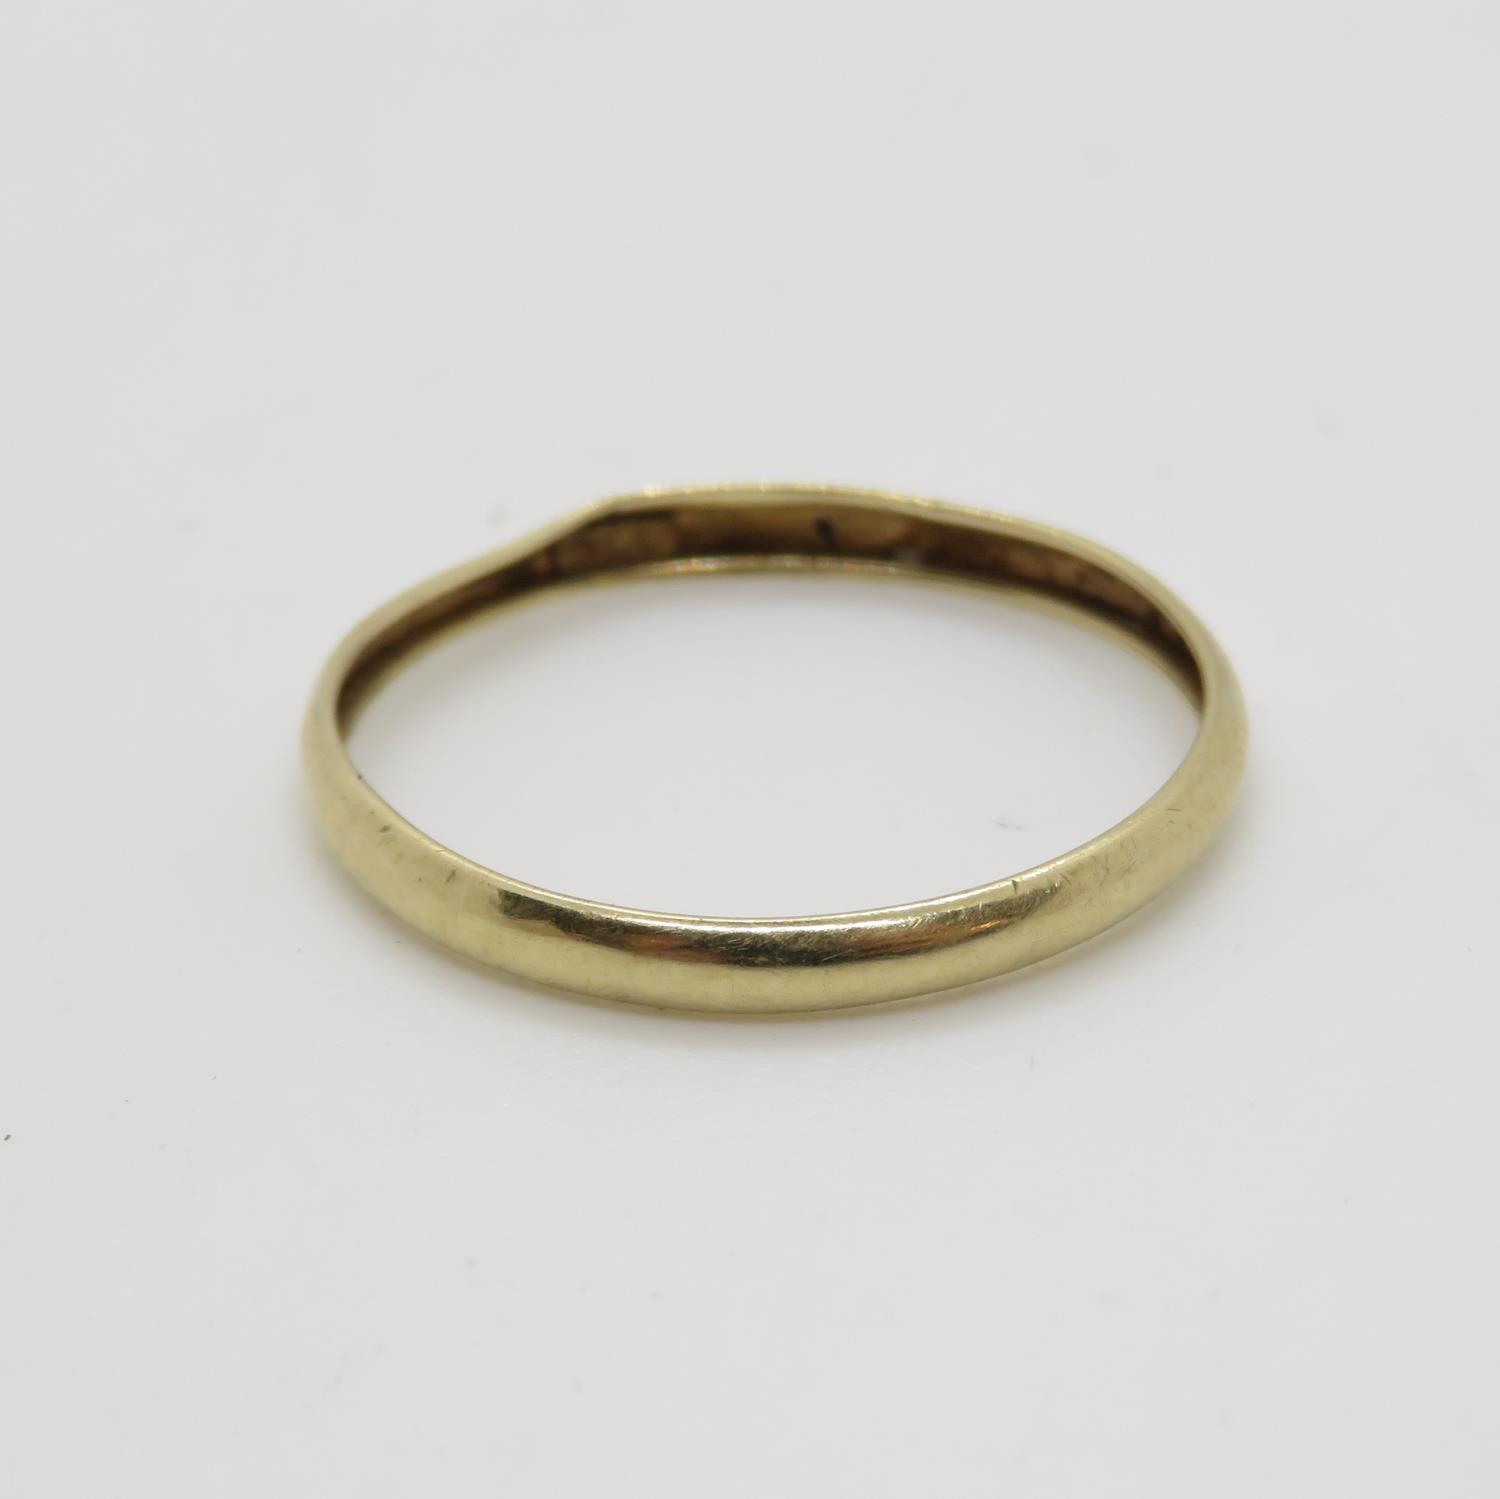 .5g 9ct gold ring size P